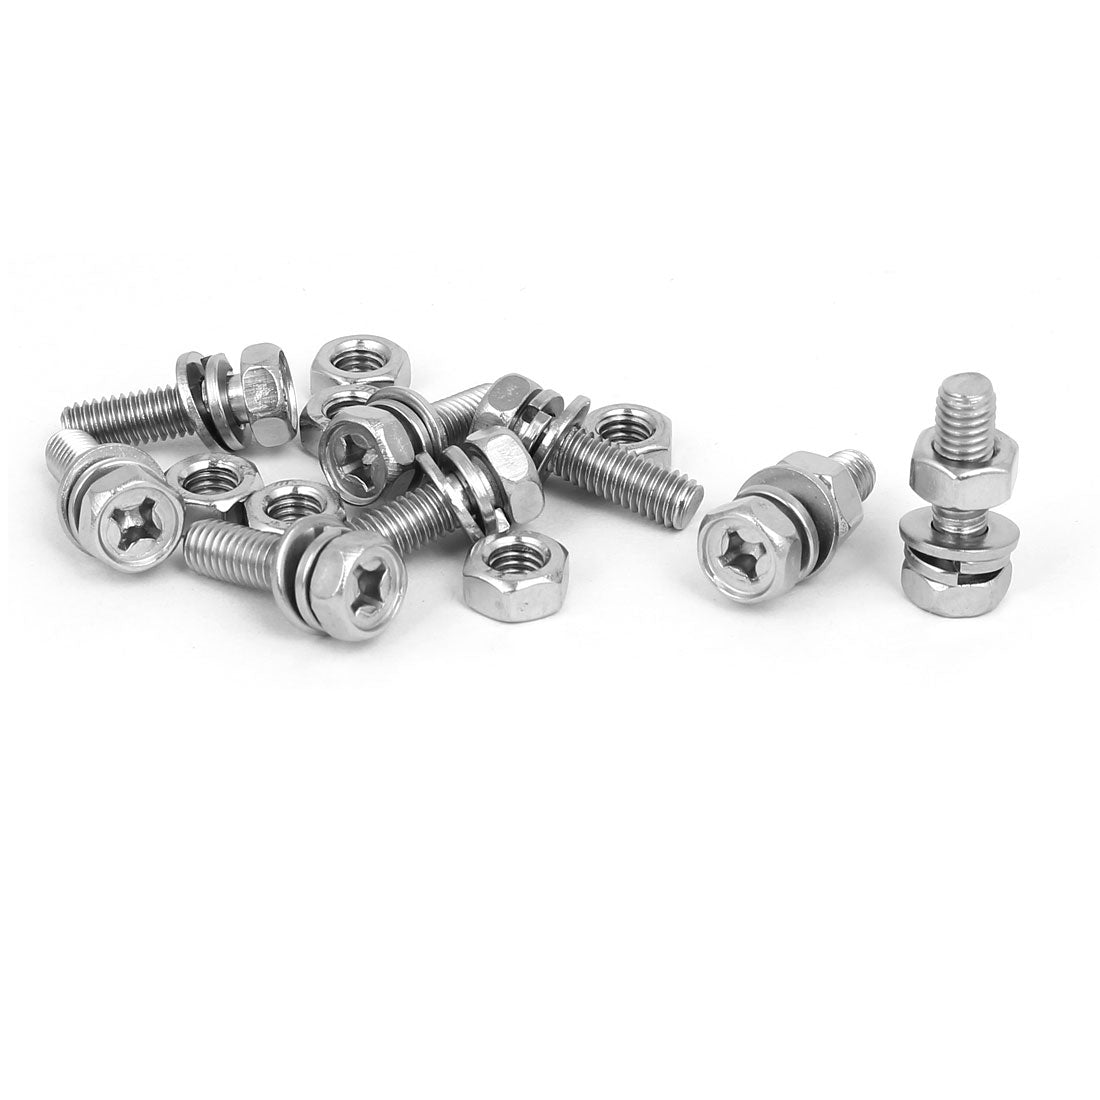 uxcell Uxcell M6 x 20mm 304 Stainless Steel Phillips Hex Head Bolts Nuts w Washers 8 Sets